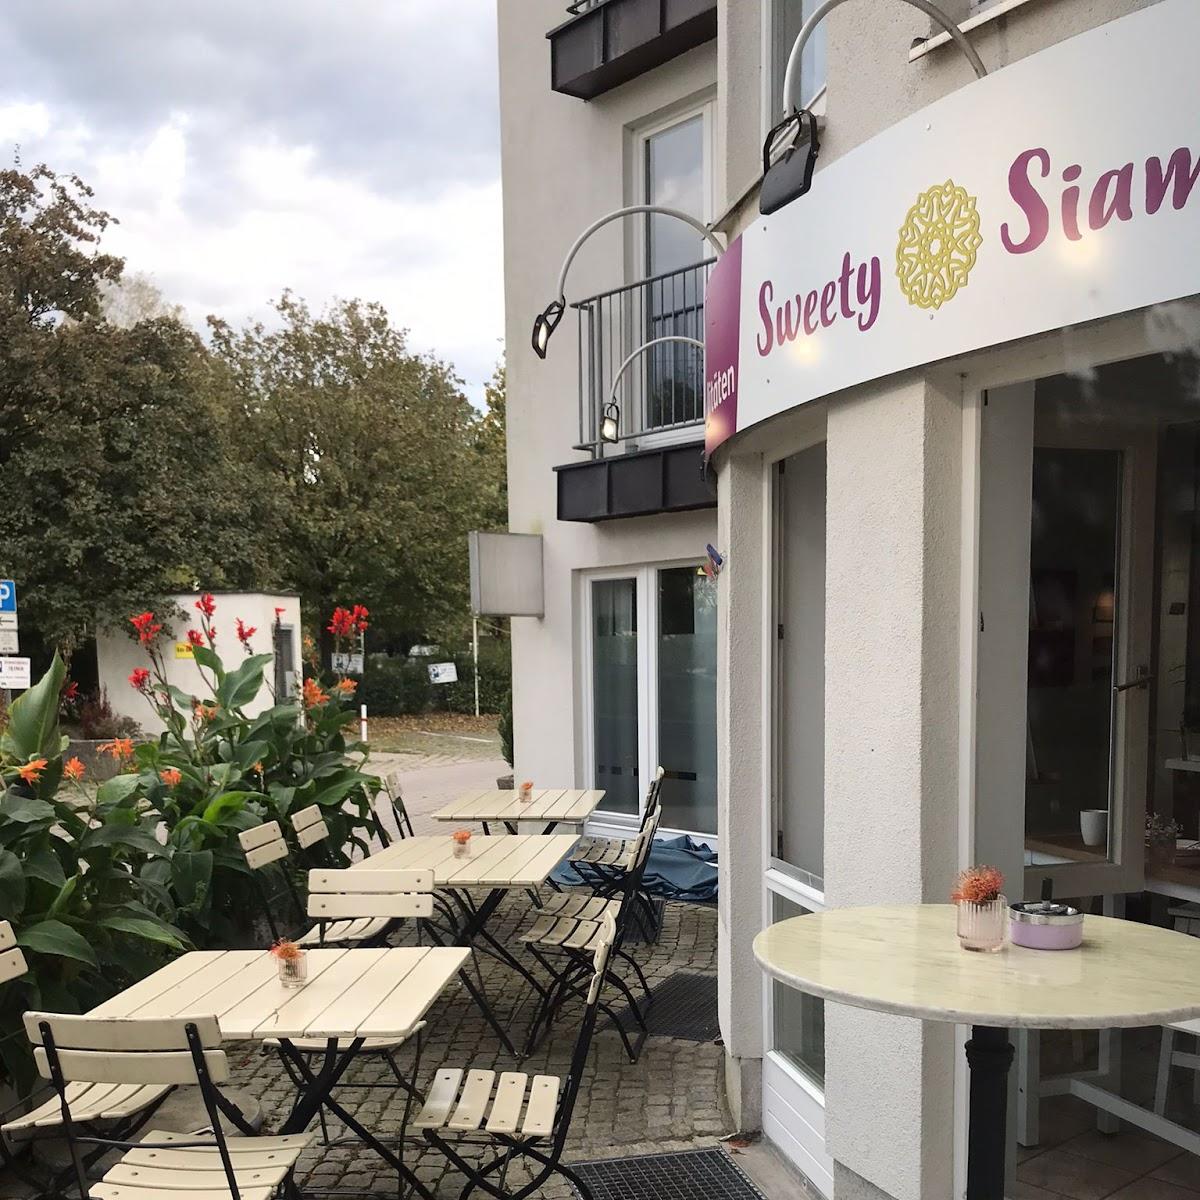 Restaurant "Sweety Siam" in Bad Aibling